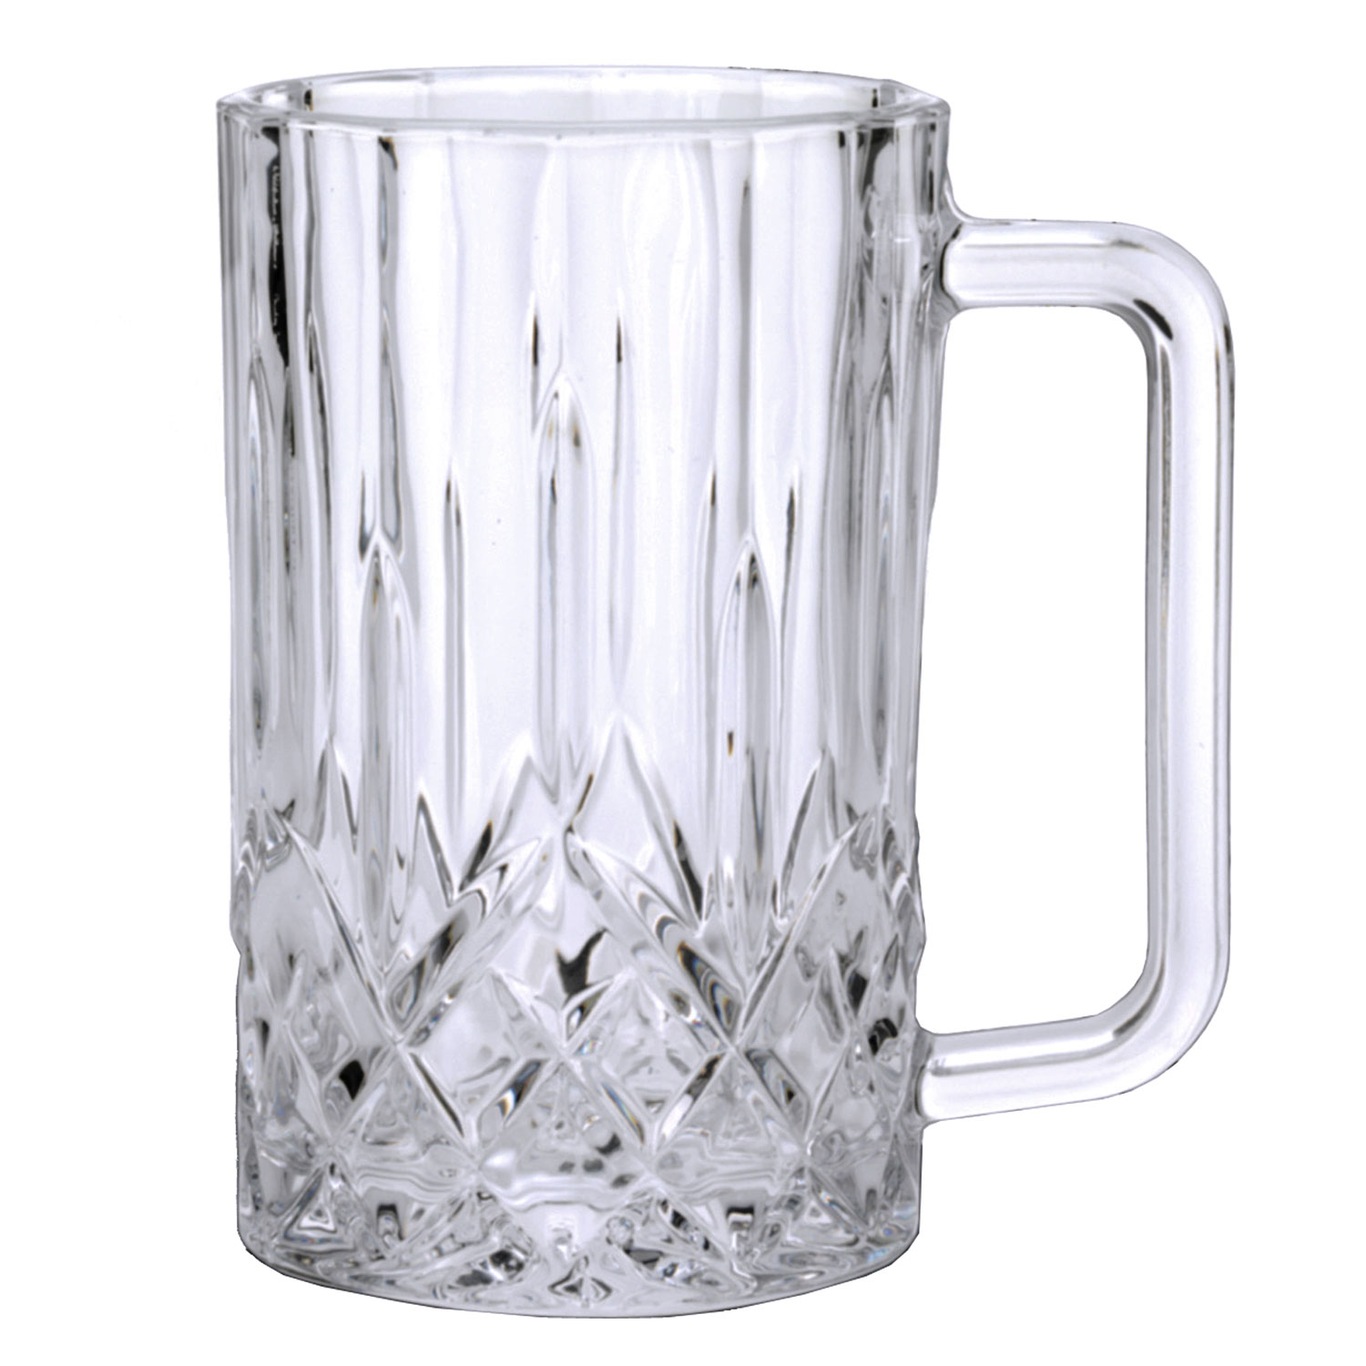 Harvey Beer Glass 50cl 2-Pcs, Clear